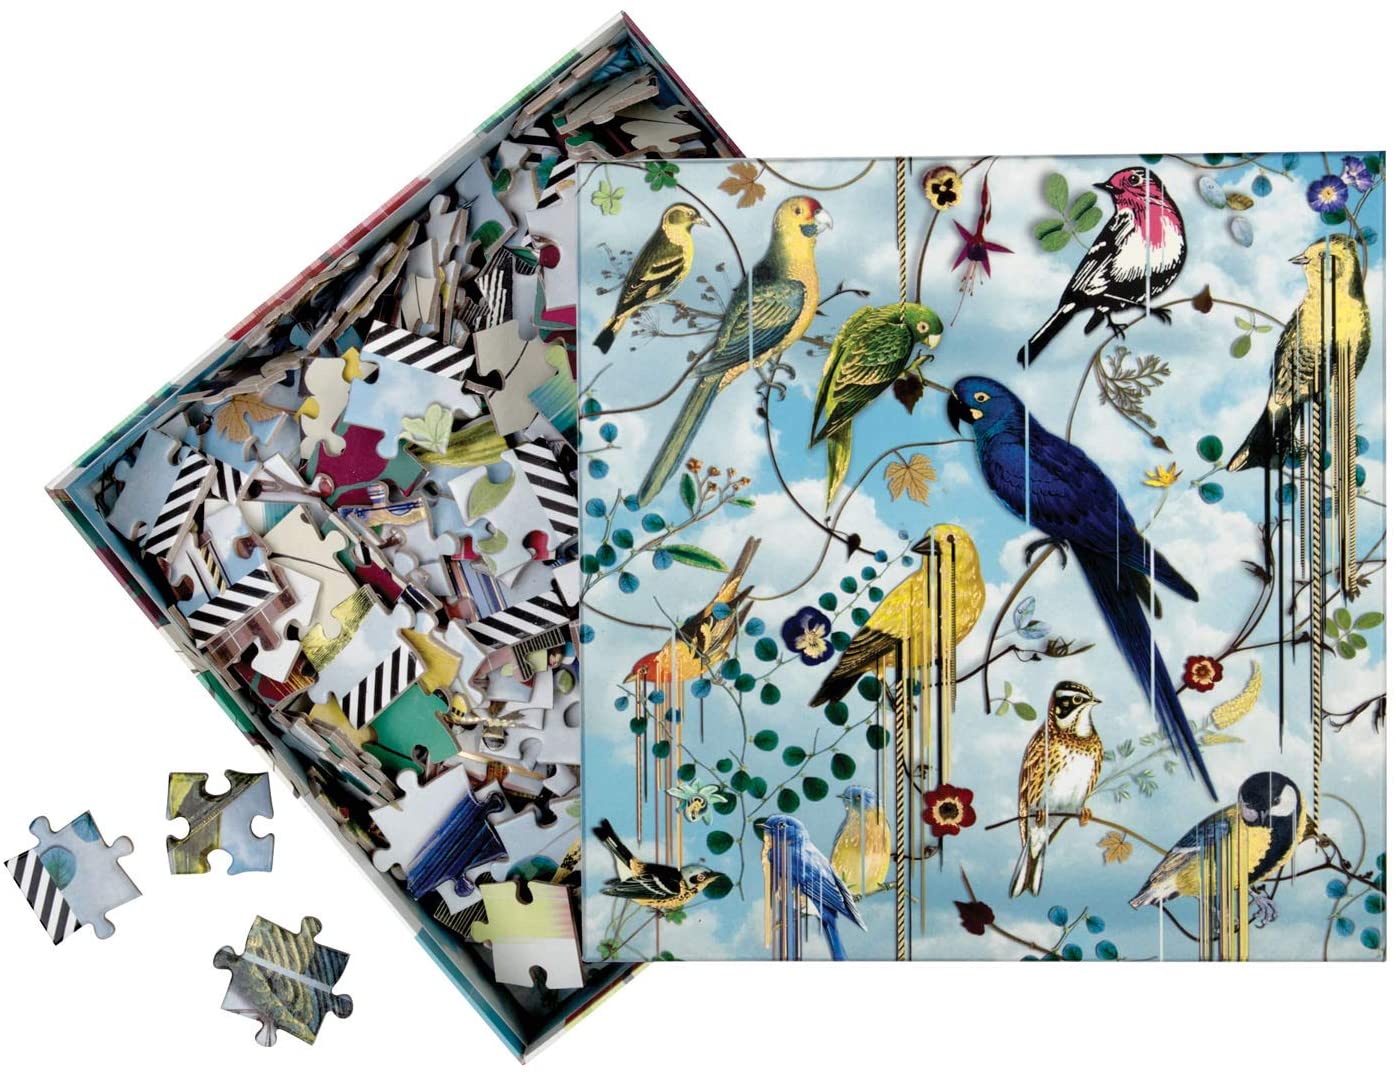 Galison - Christian Lacroix Birds Sinfonia - 250 Piece Double Sided Puzzle